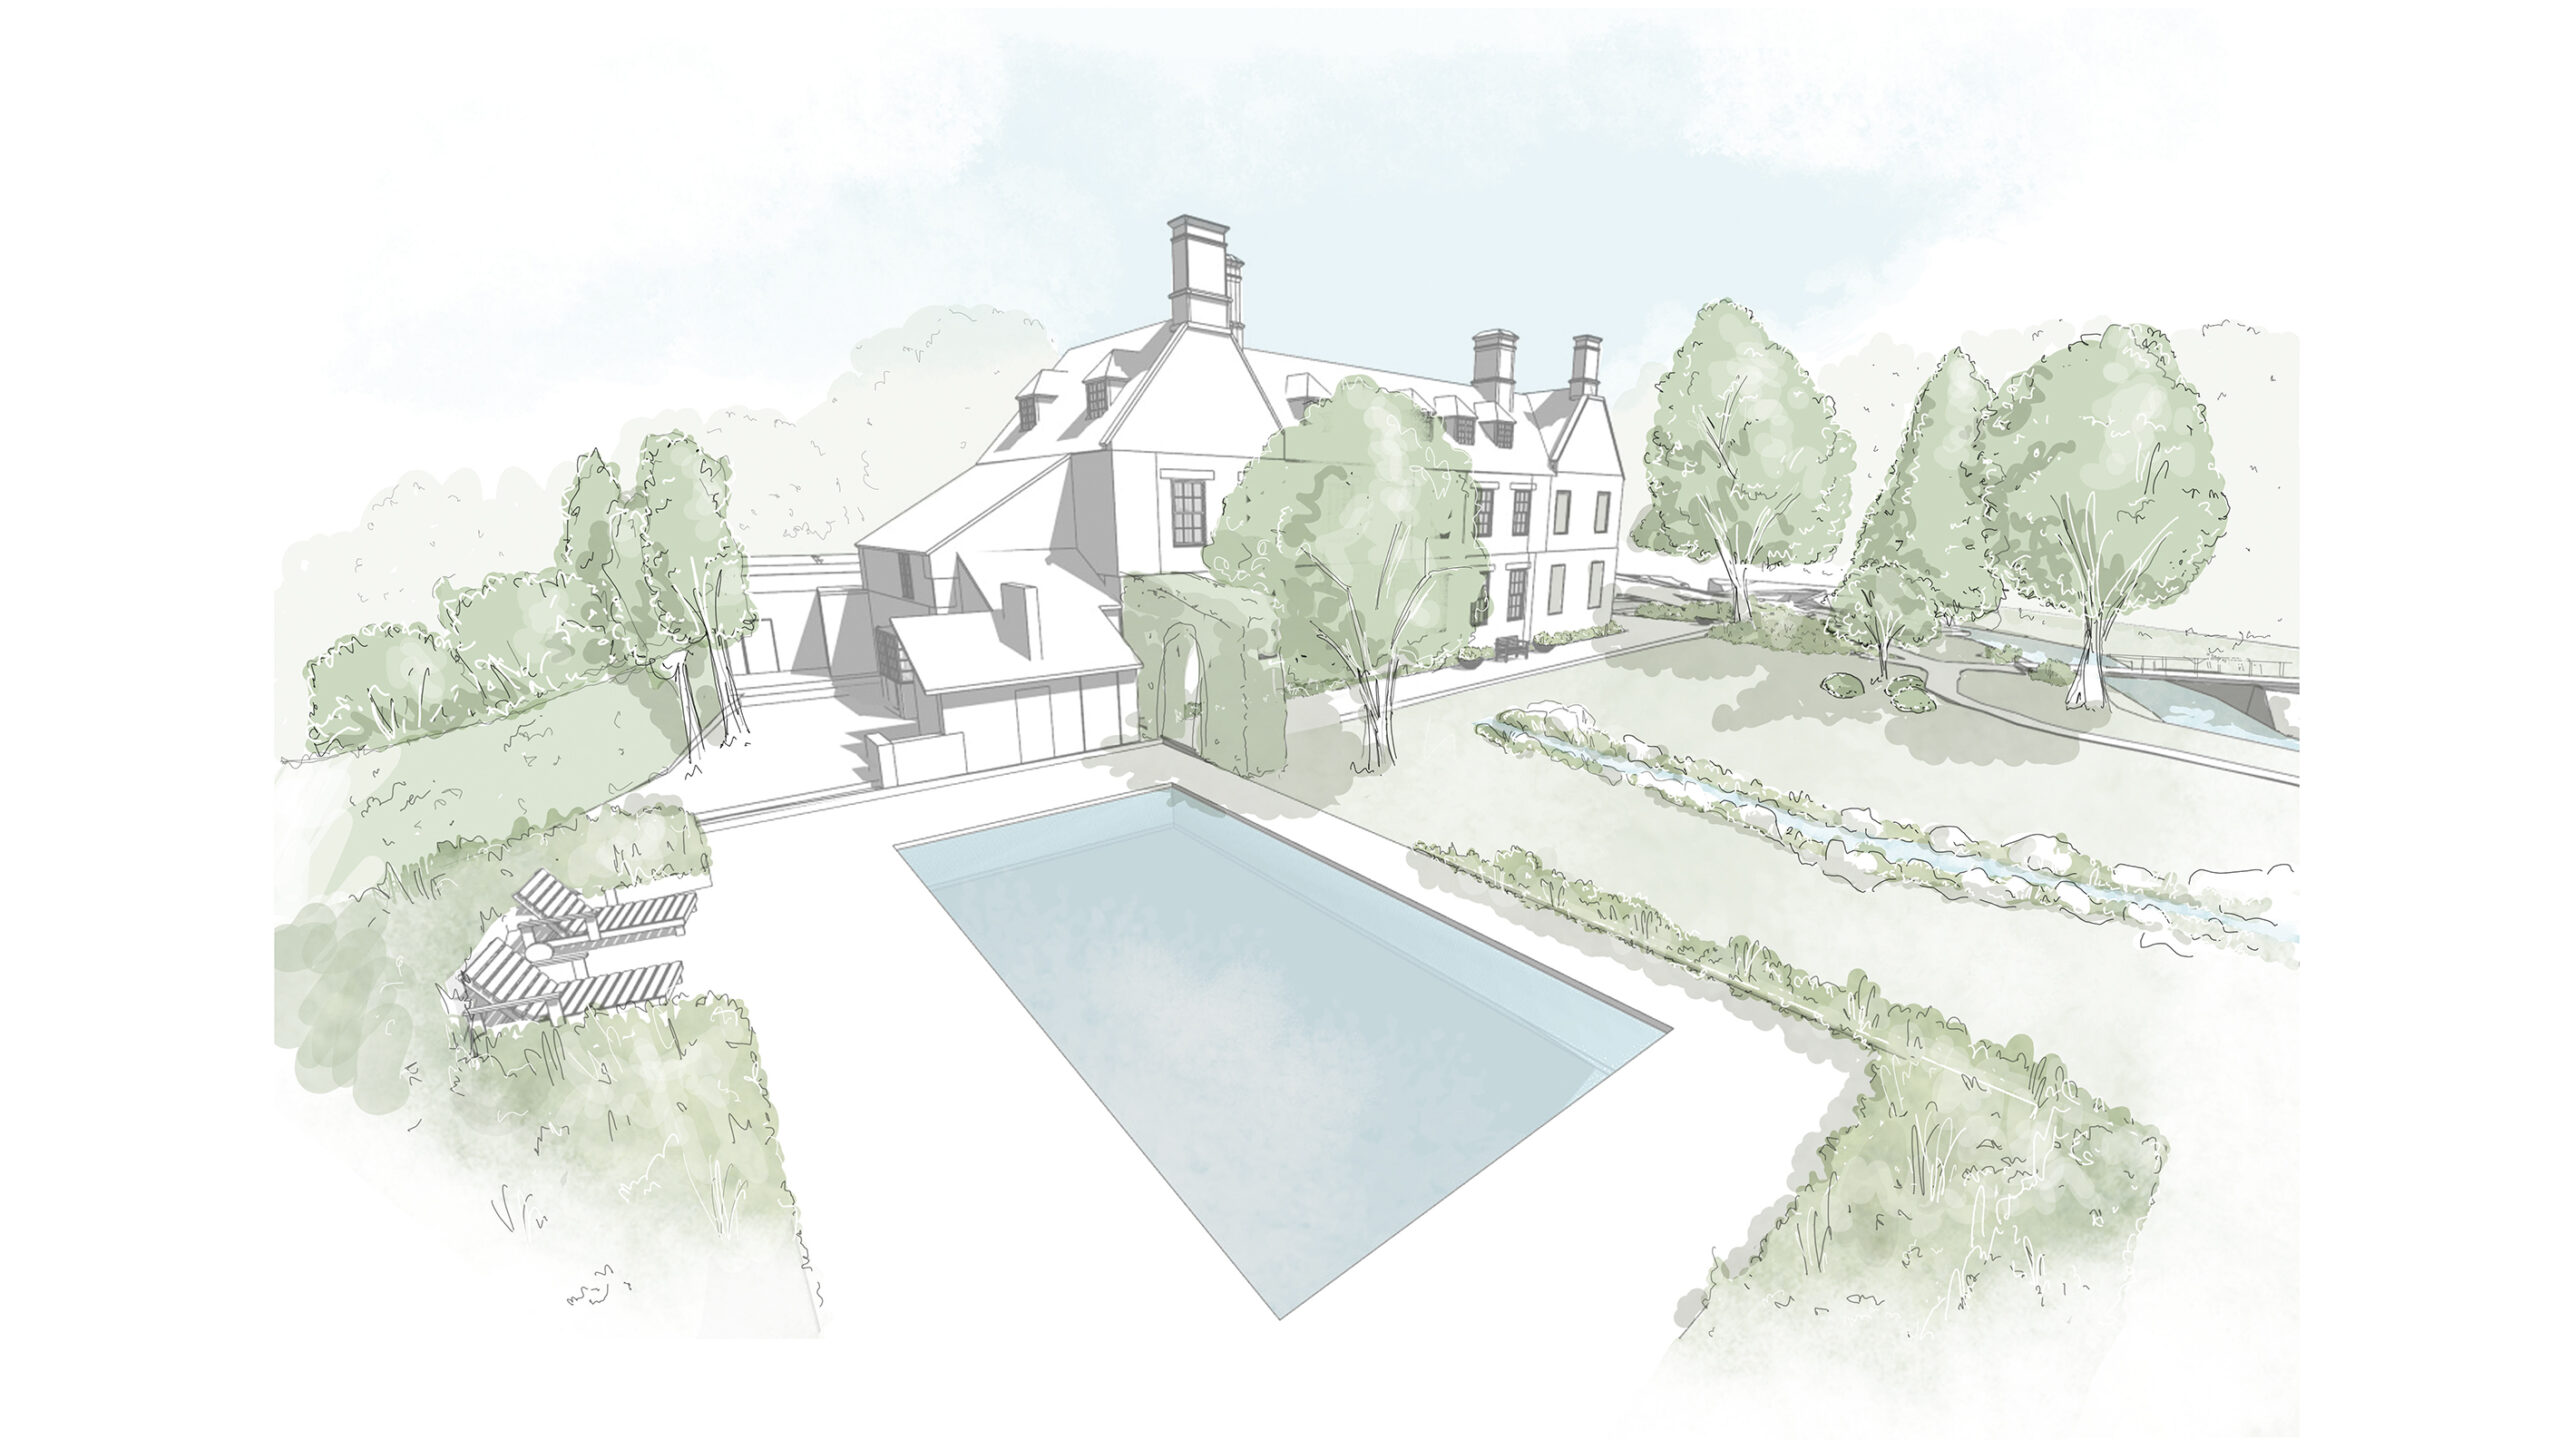 Grand English country manor house architects